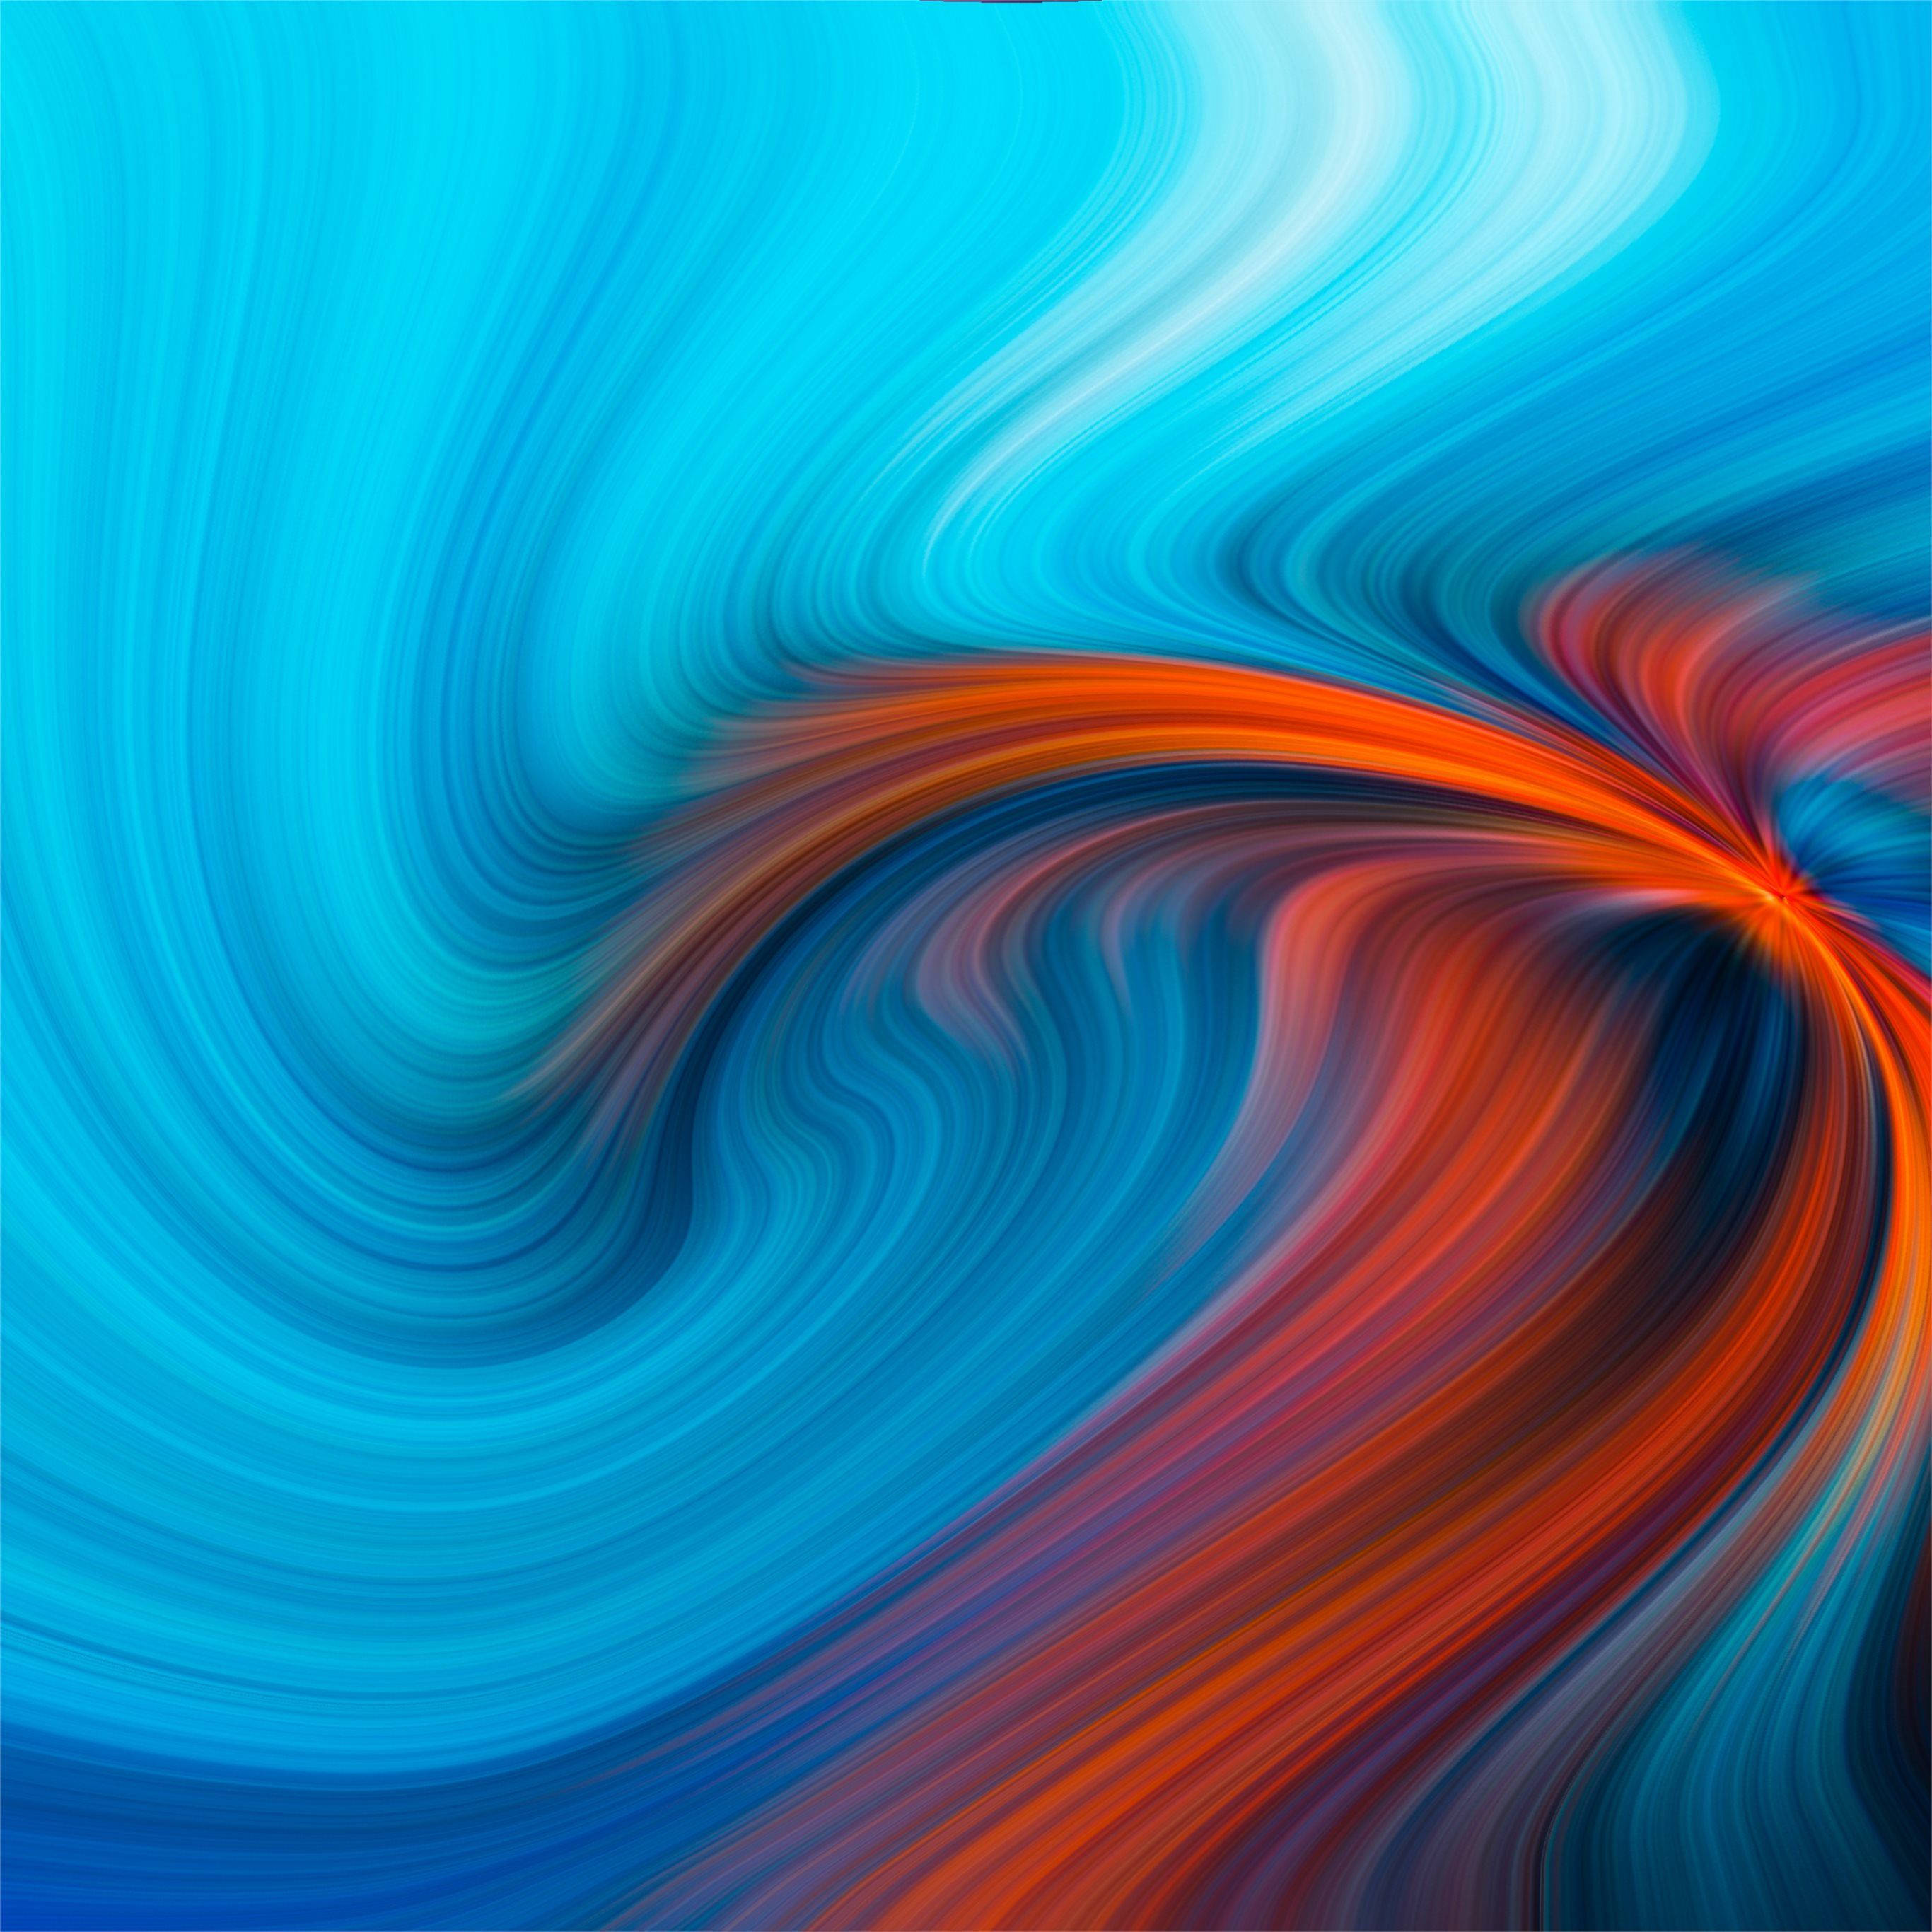 Abstract Illustration As Official Ipad Theme Background